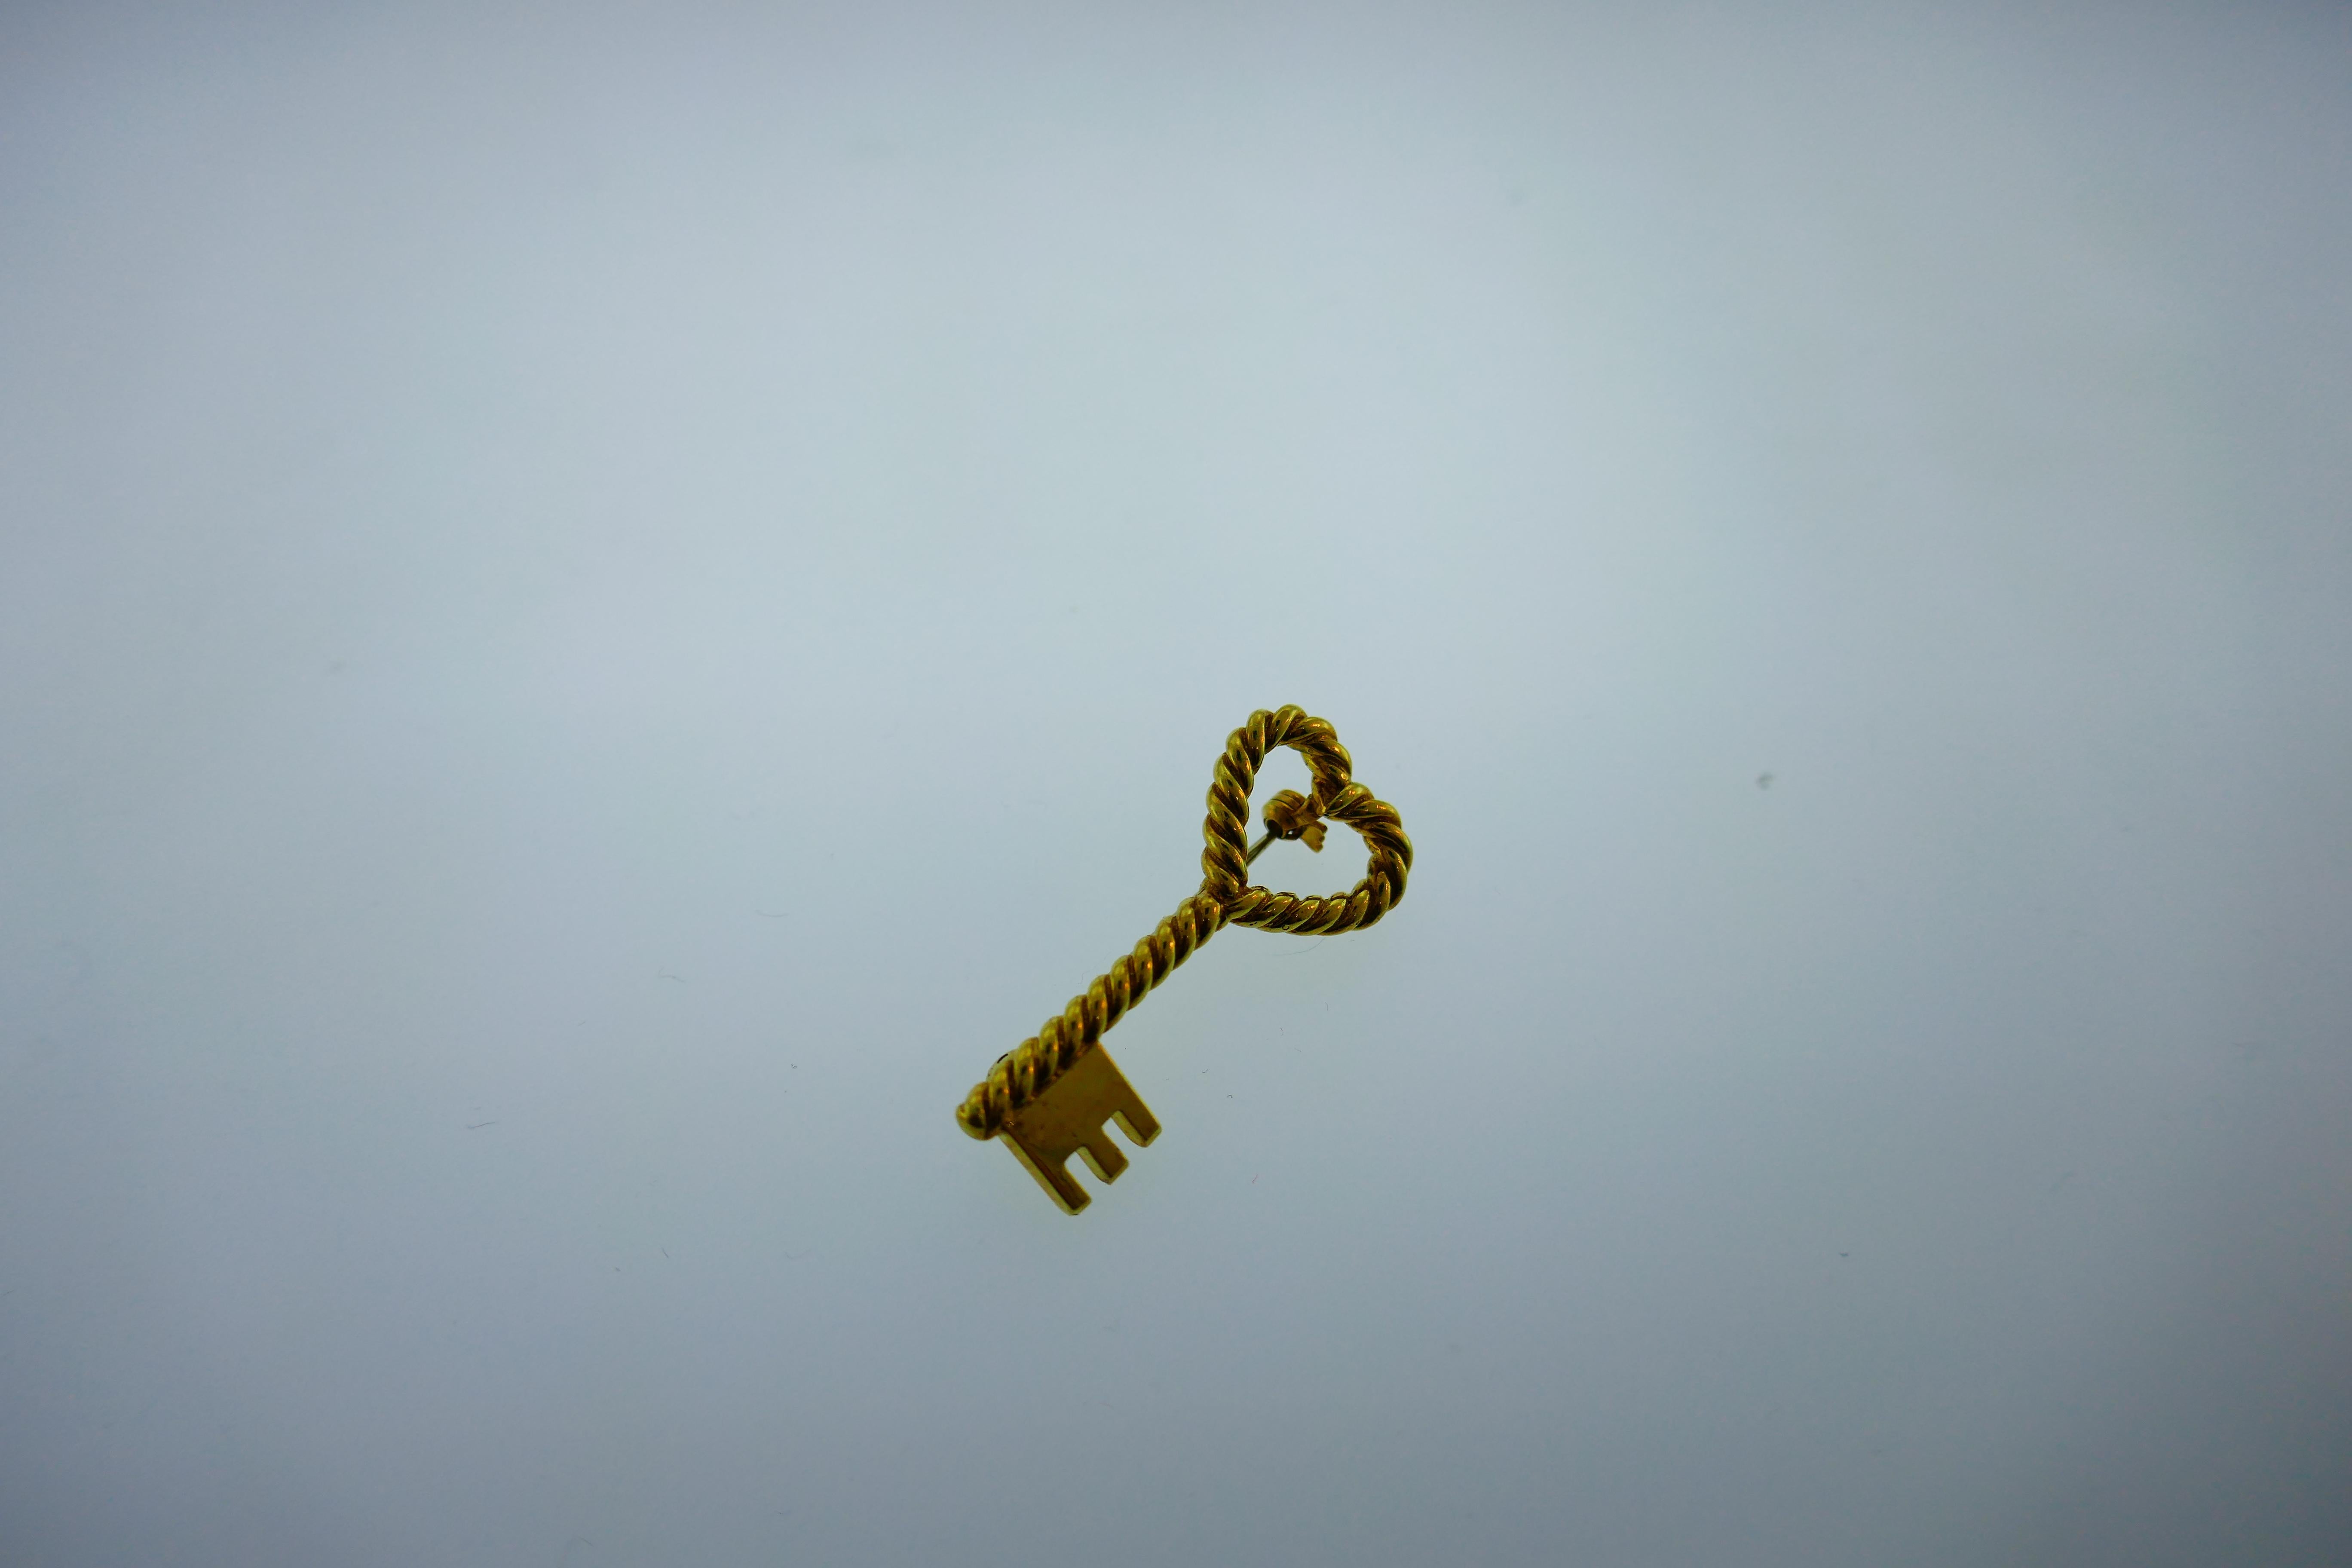 Tiffany & Co. 18k Yellow Gold Key To My Heart Brooch / Pendant Vintage Circa 1960s

Here is your chance to purchase a beautiful and highly collectible designer brooch / pendant. Truly a great piece at a great price! 

Weight: 8 grams 

Dimensions: